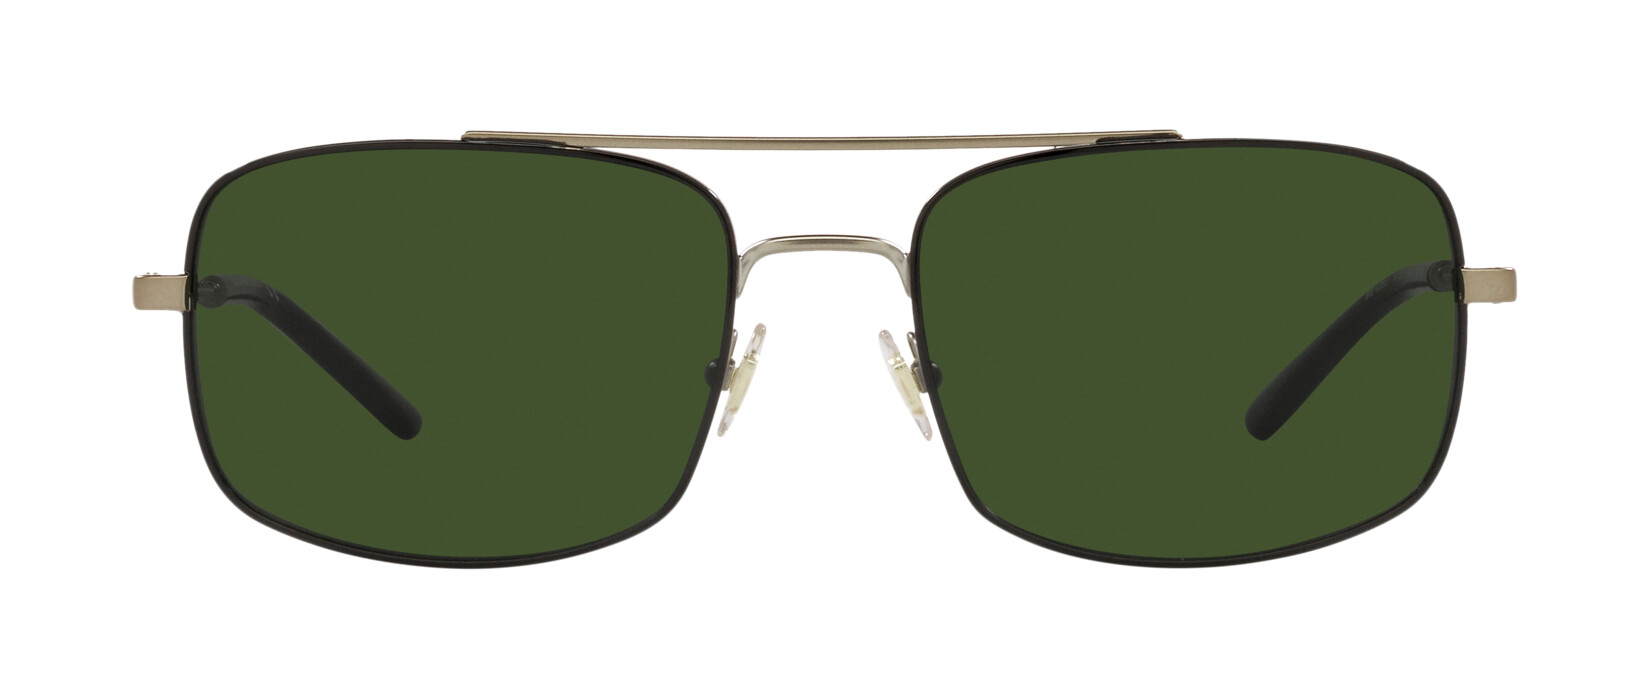 [products.image.front] Brooks Brothers 0BB4060 101571 Sonnenbrille